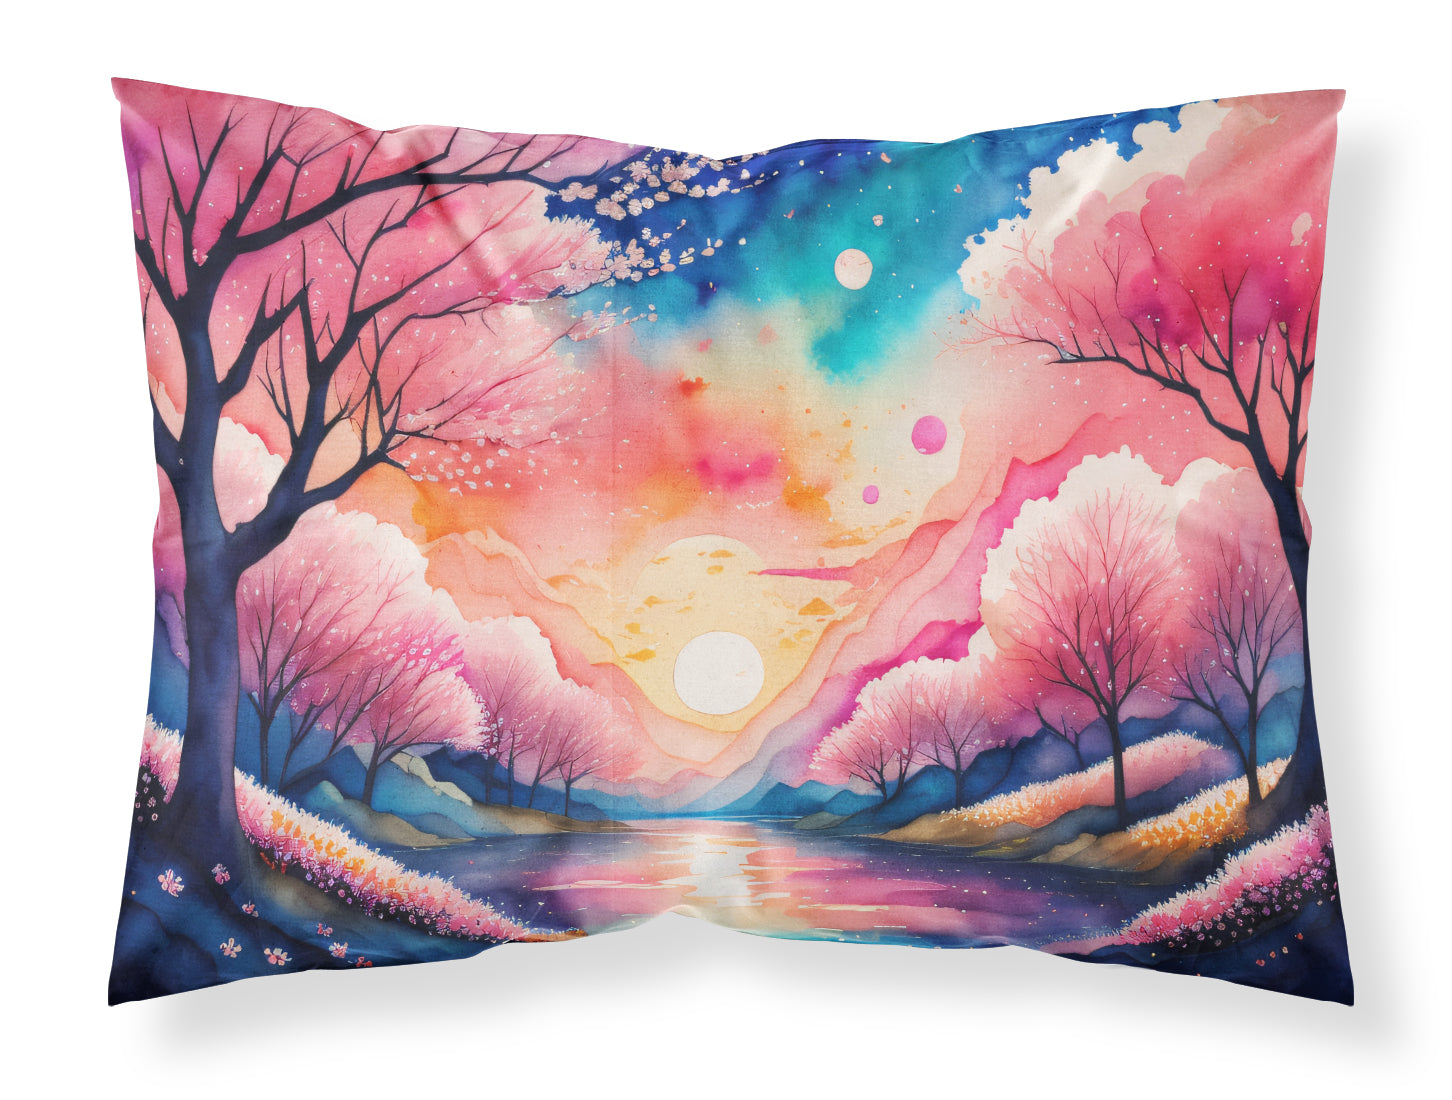 Buy this Cherry Blossom in Color Fabric Standard Pillowcase